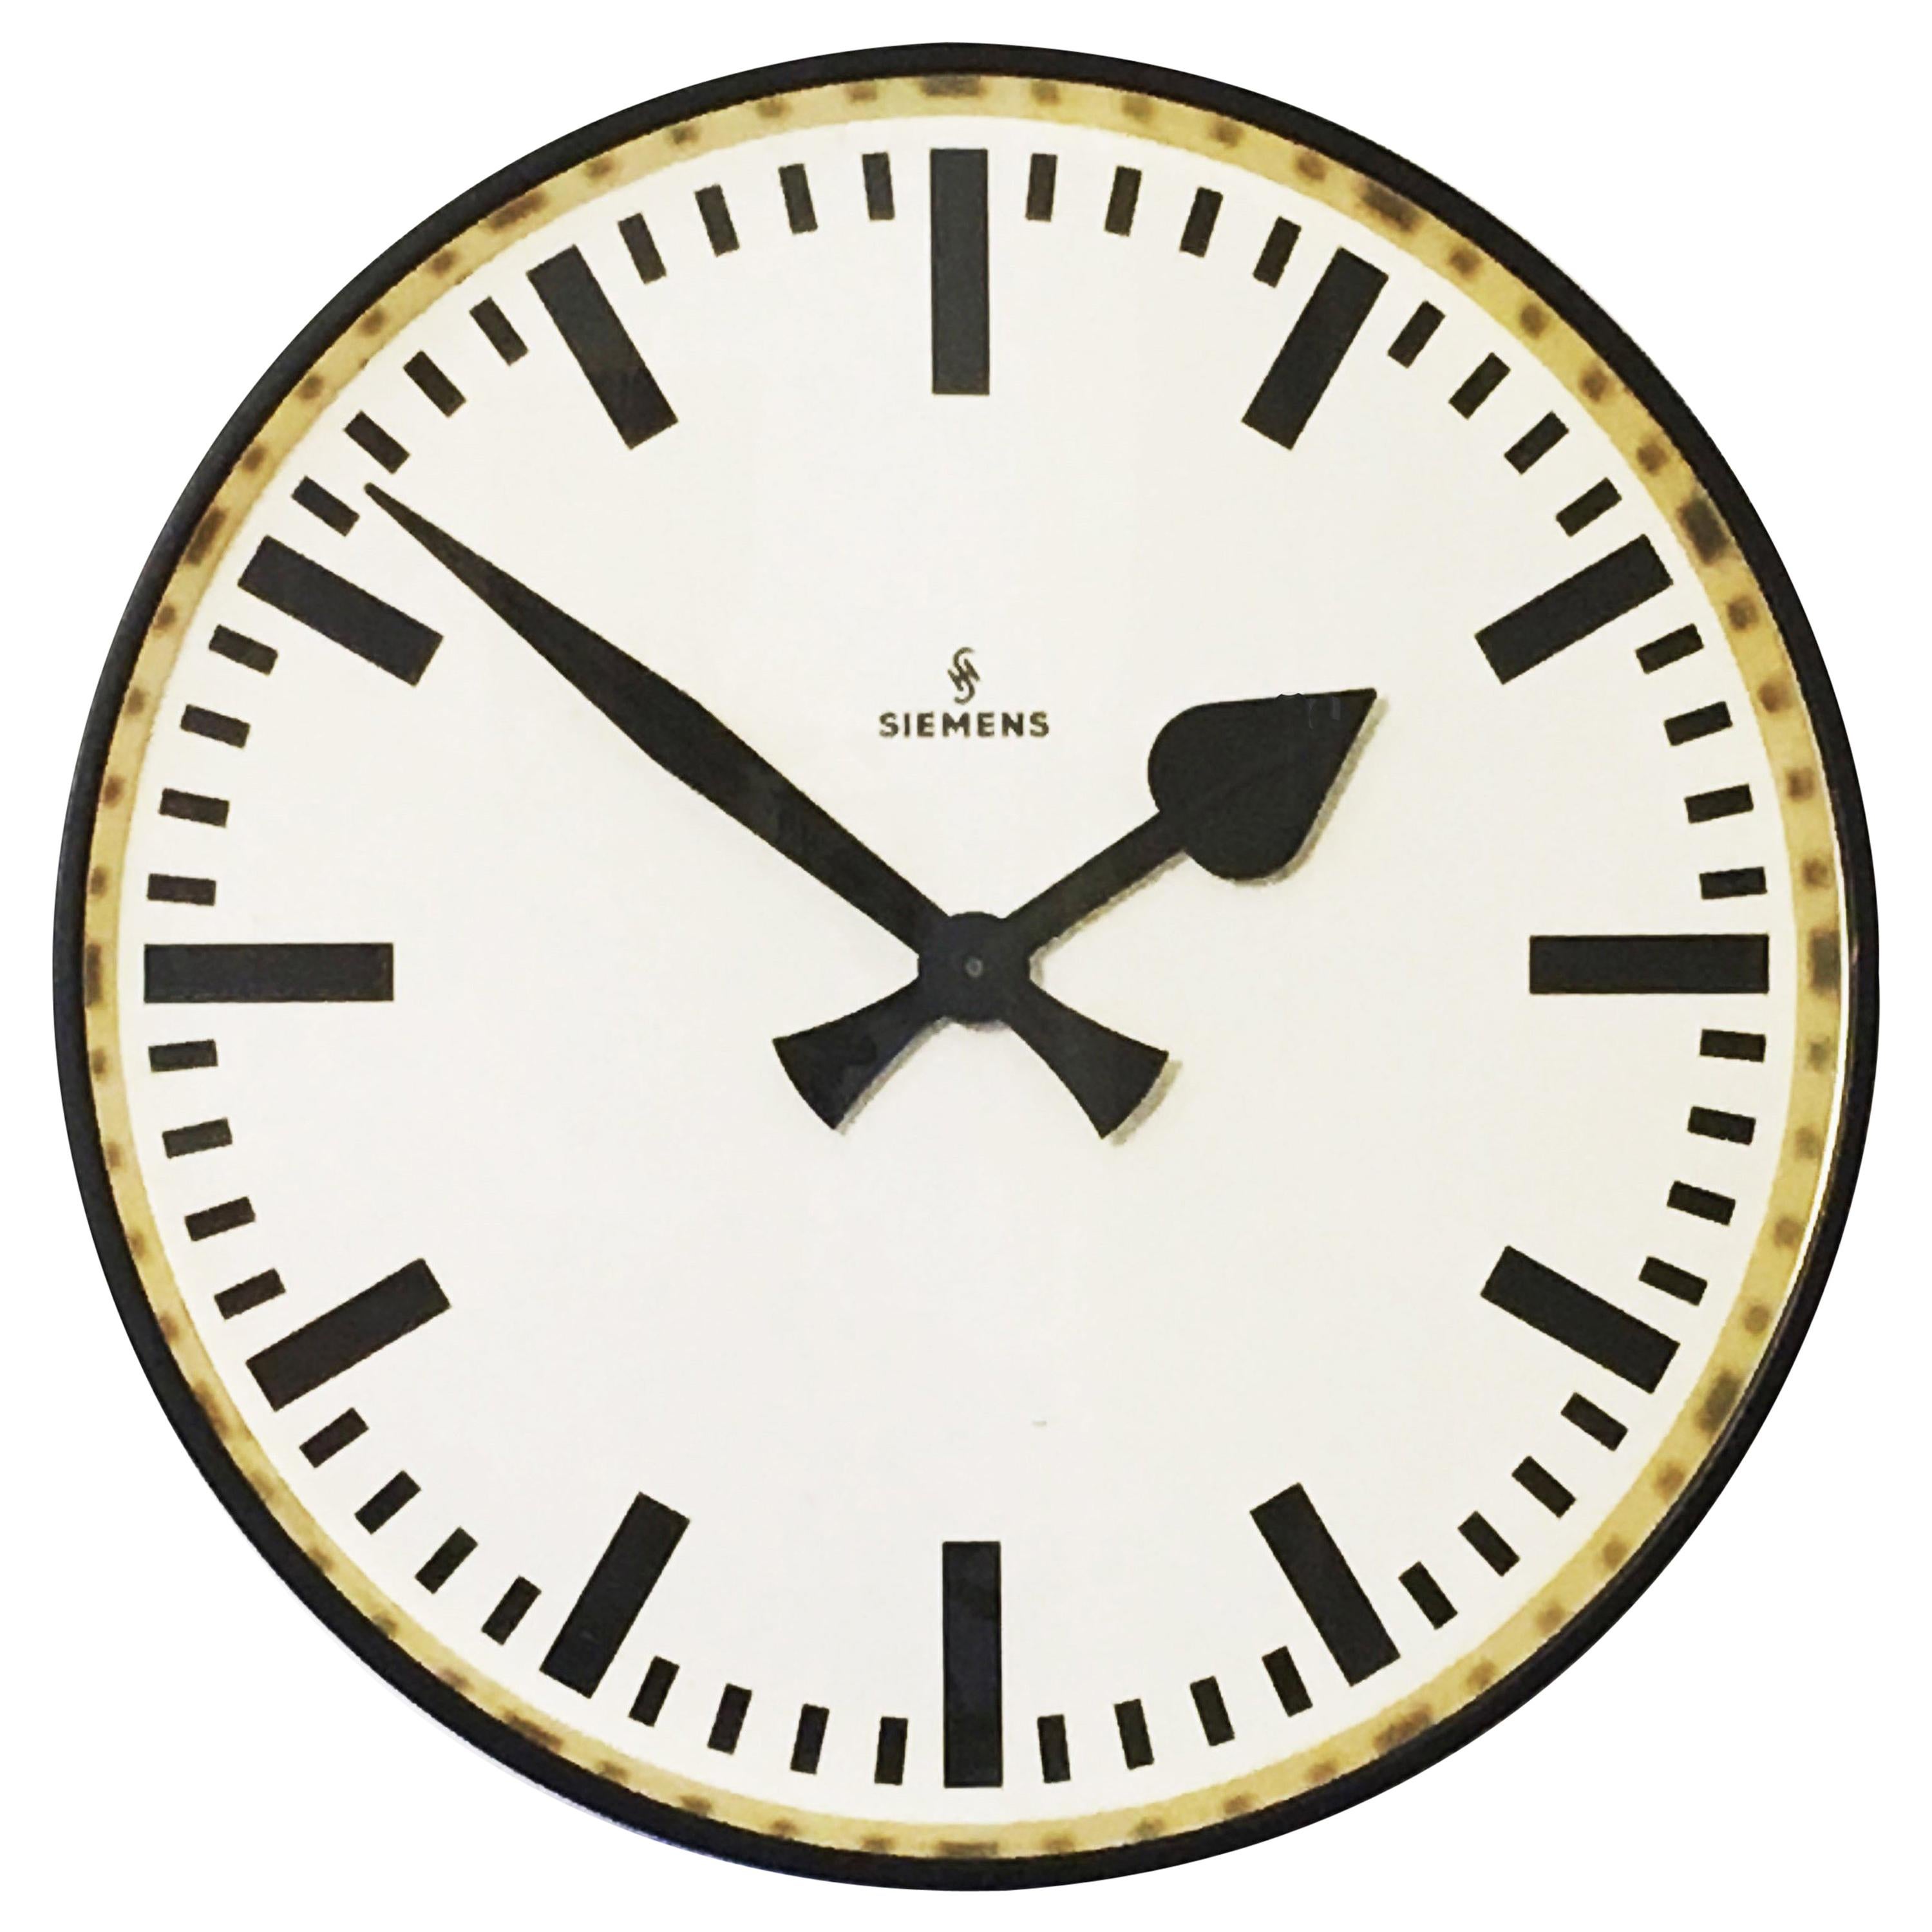 Large Siemens Factory, Station or Workshop Wall Clock